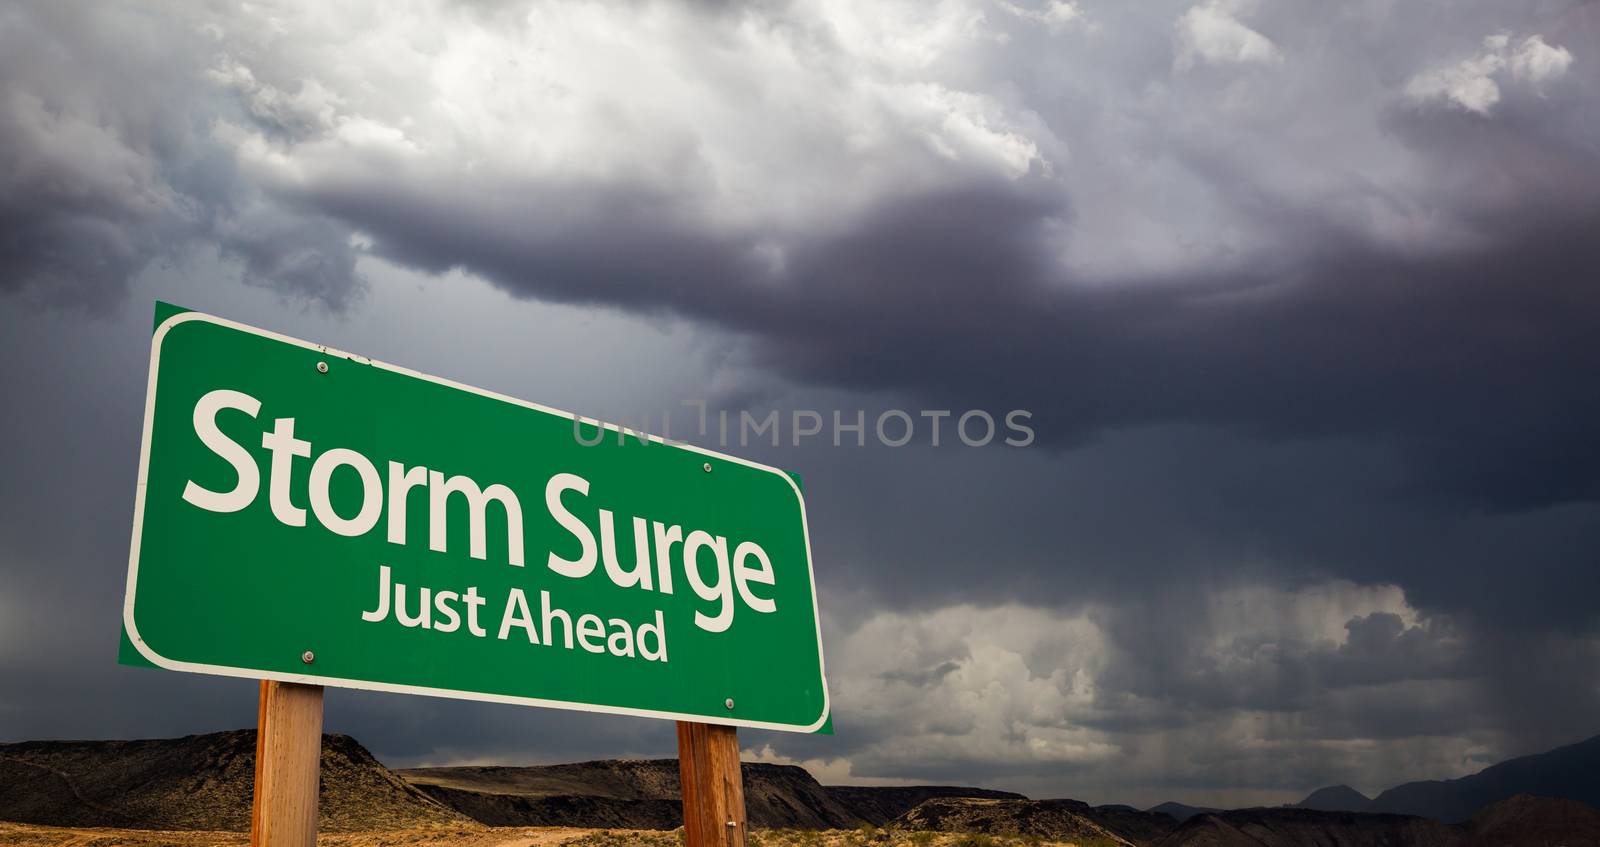 Storm Surge Just Ahead Green Road Sign with Dramatic Clouds and Rain.